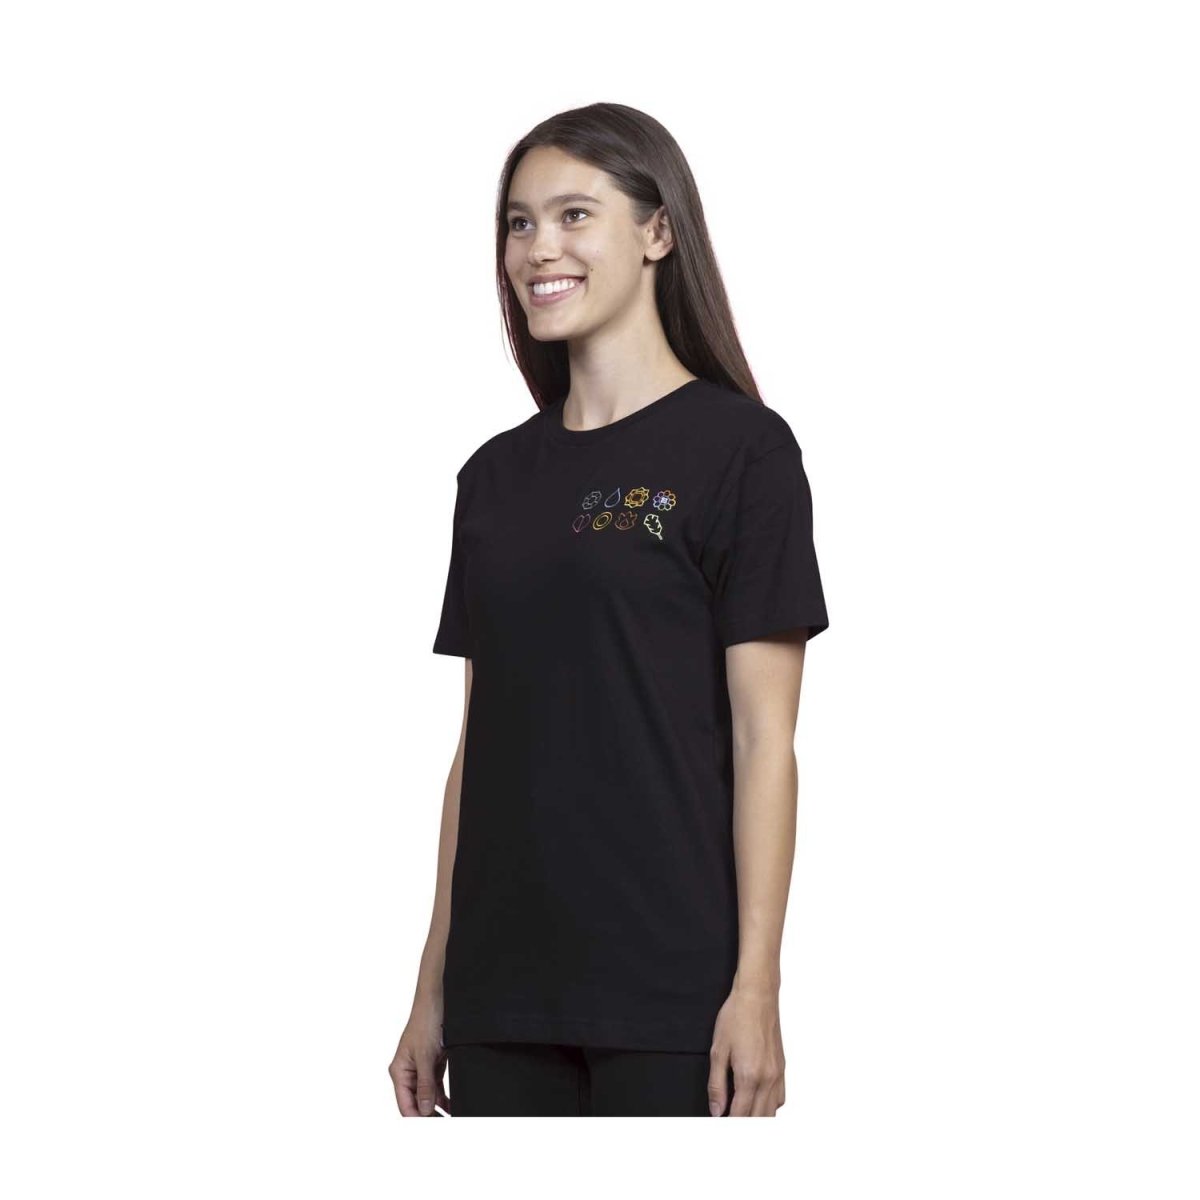 Kanto Gym Badge Black Relaxed Fit Crew Neck T-Shirt - Women